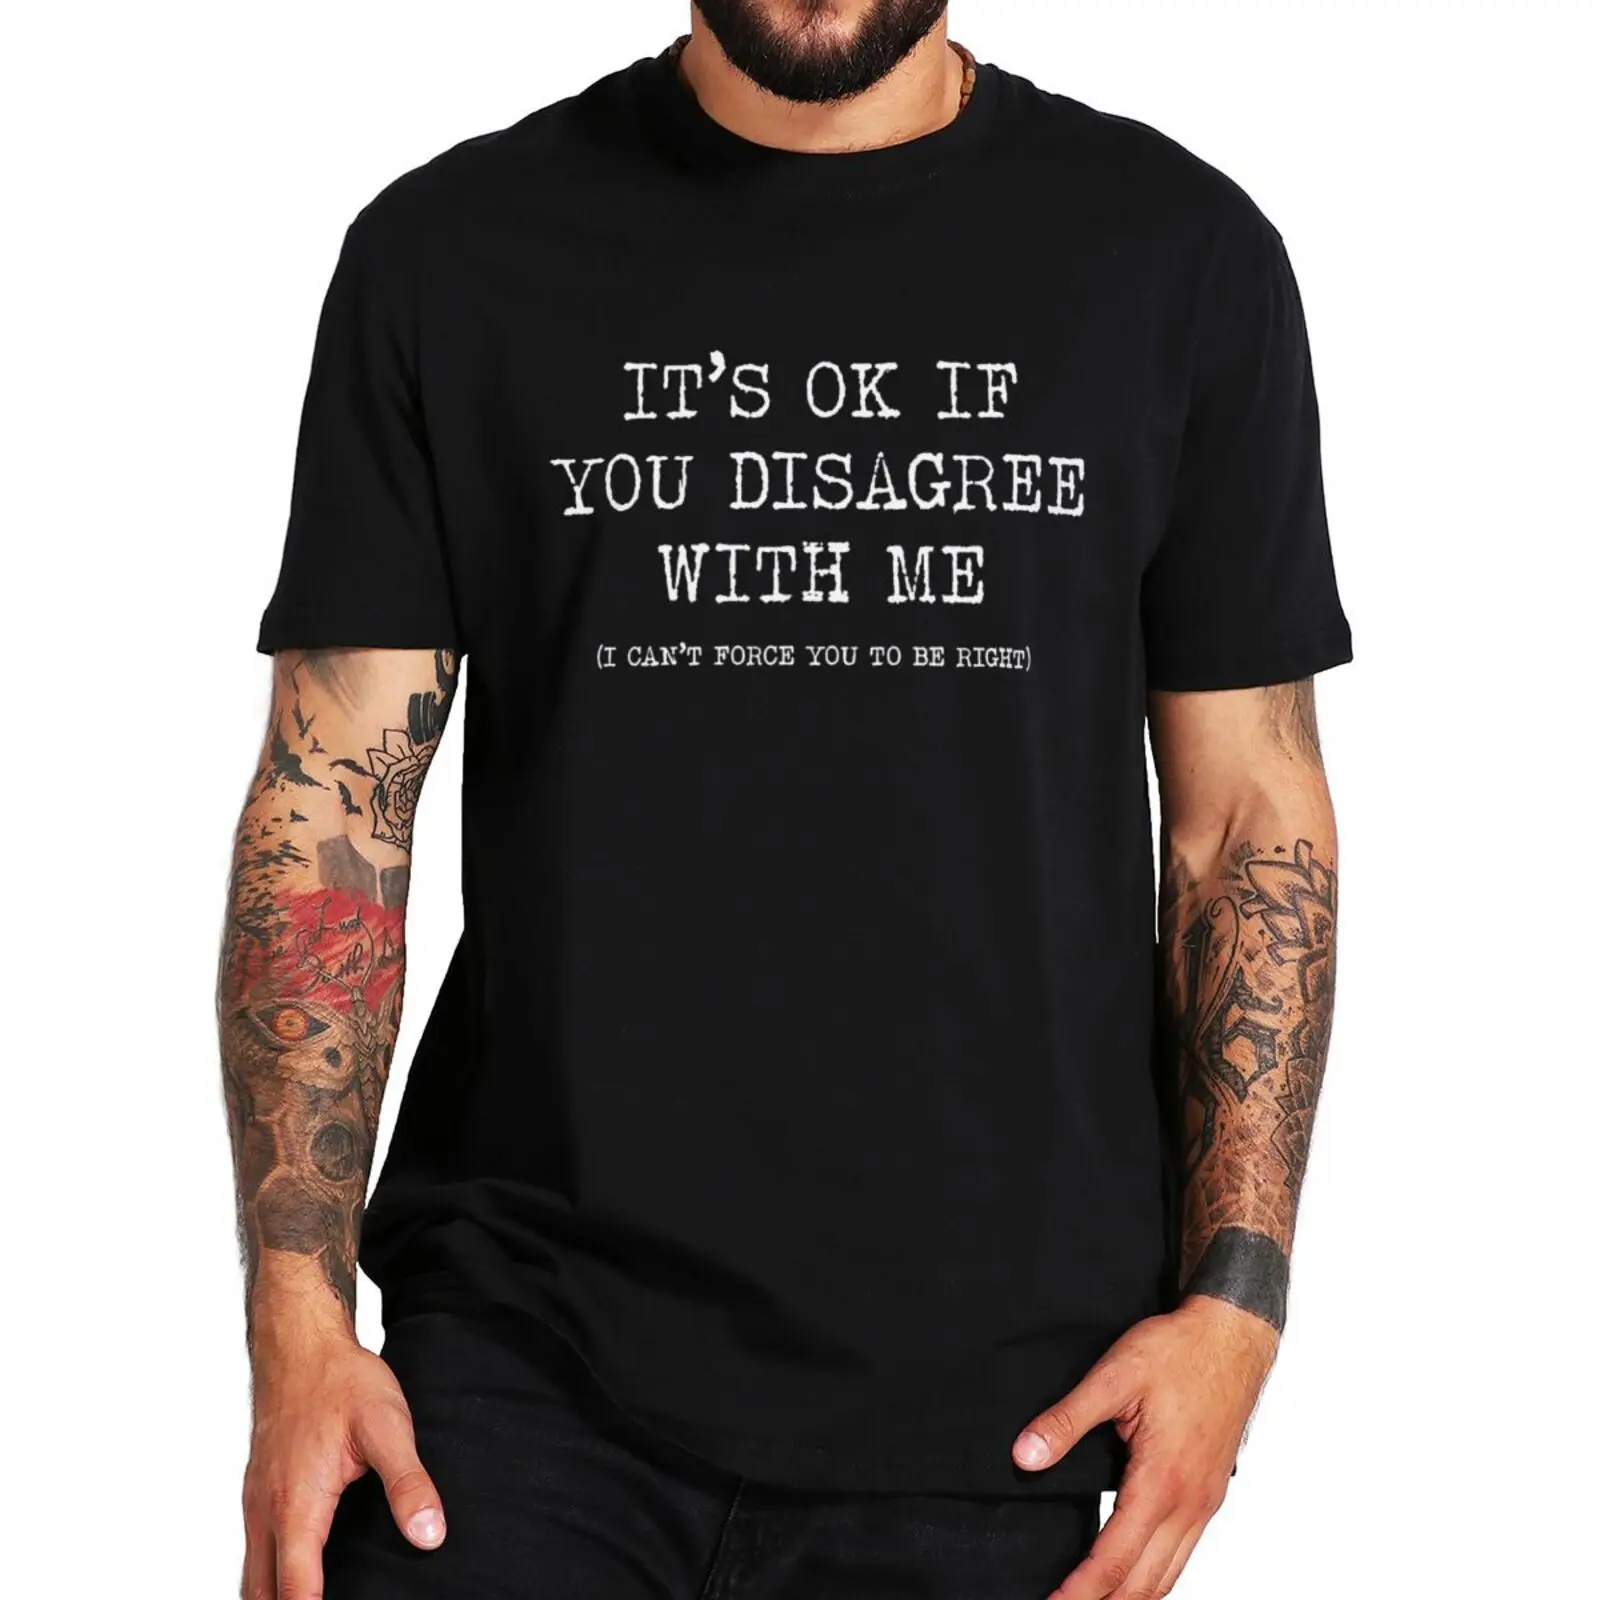 

It's Ok If You Disagree With Me T-shirt Funny Rude Sarcastic Opposite Joke Unisex Tee Tops Summer Cotton EU Size T Shirts